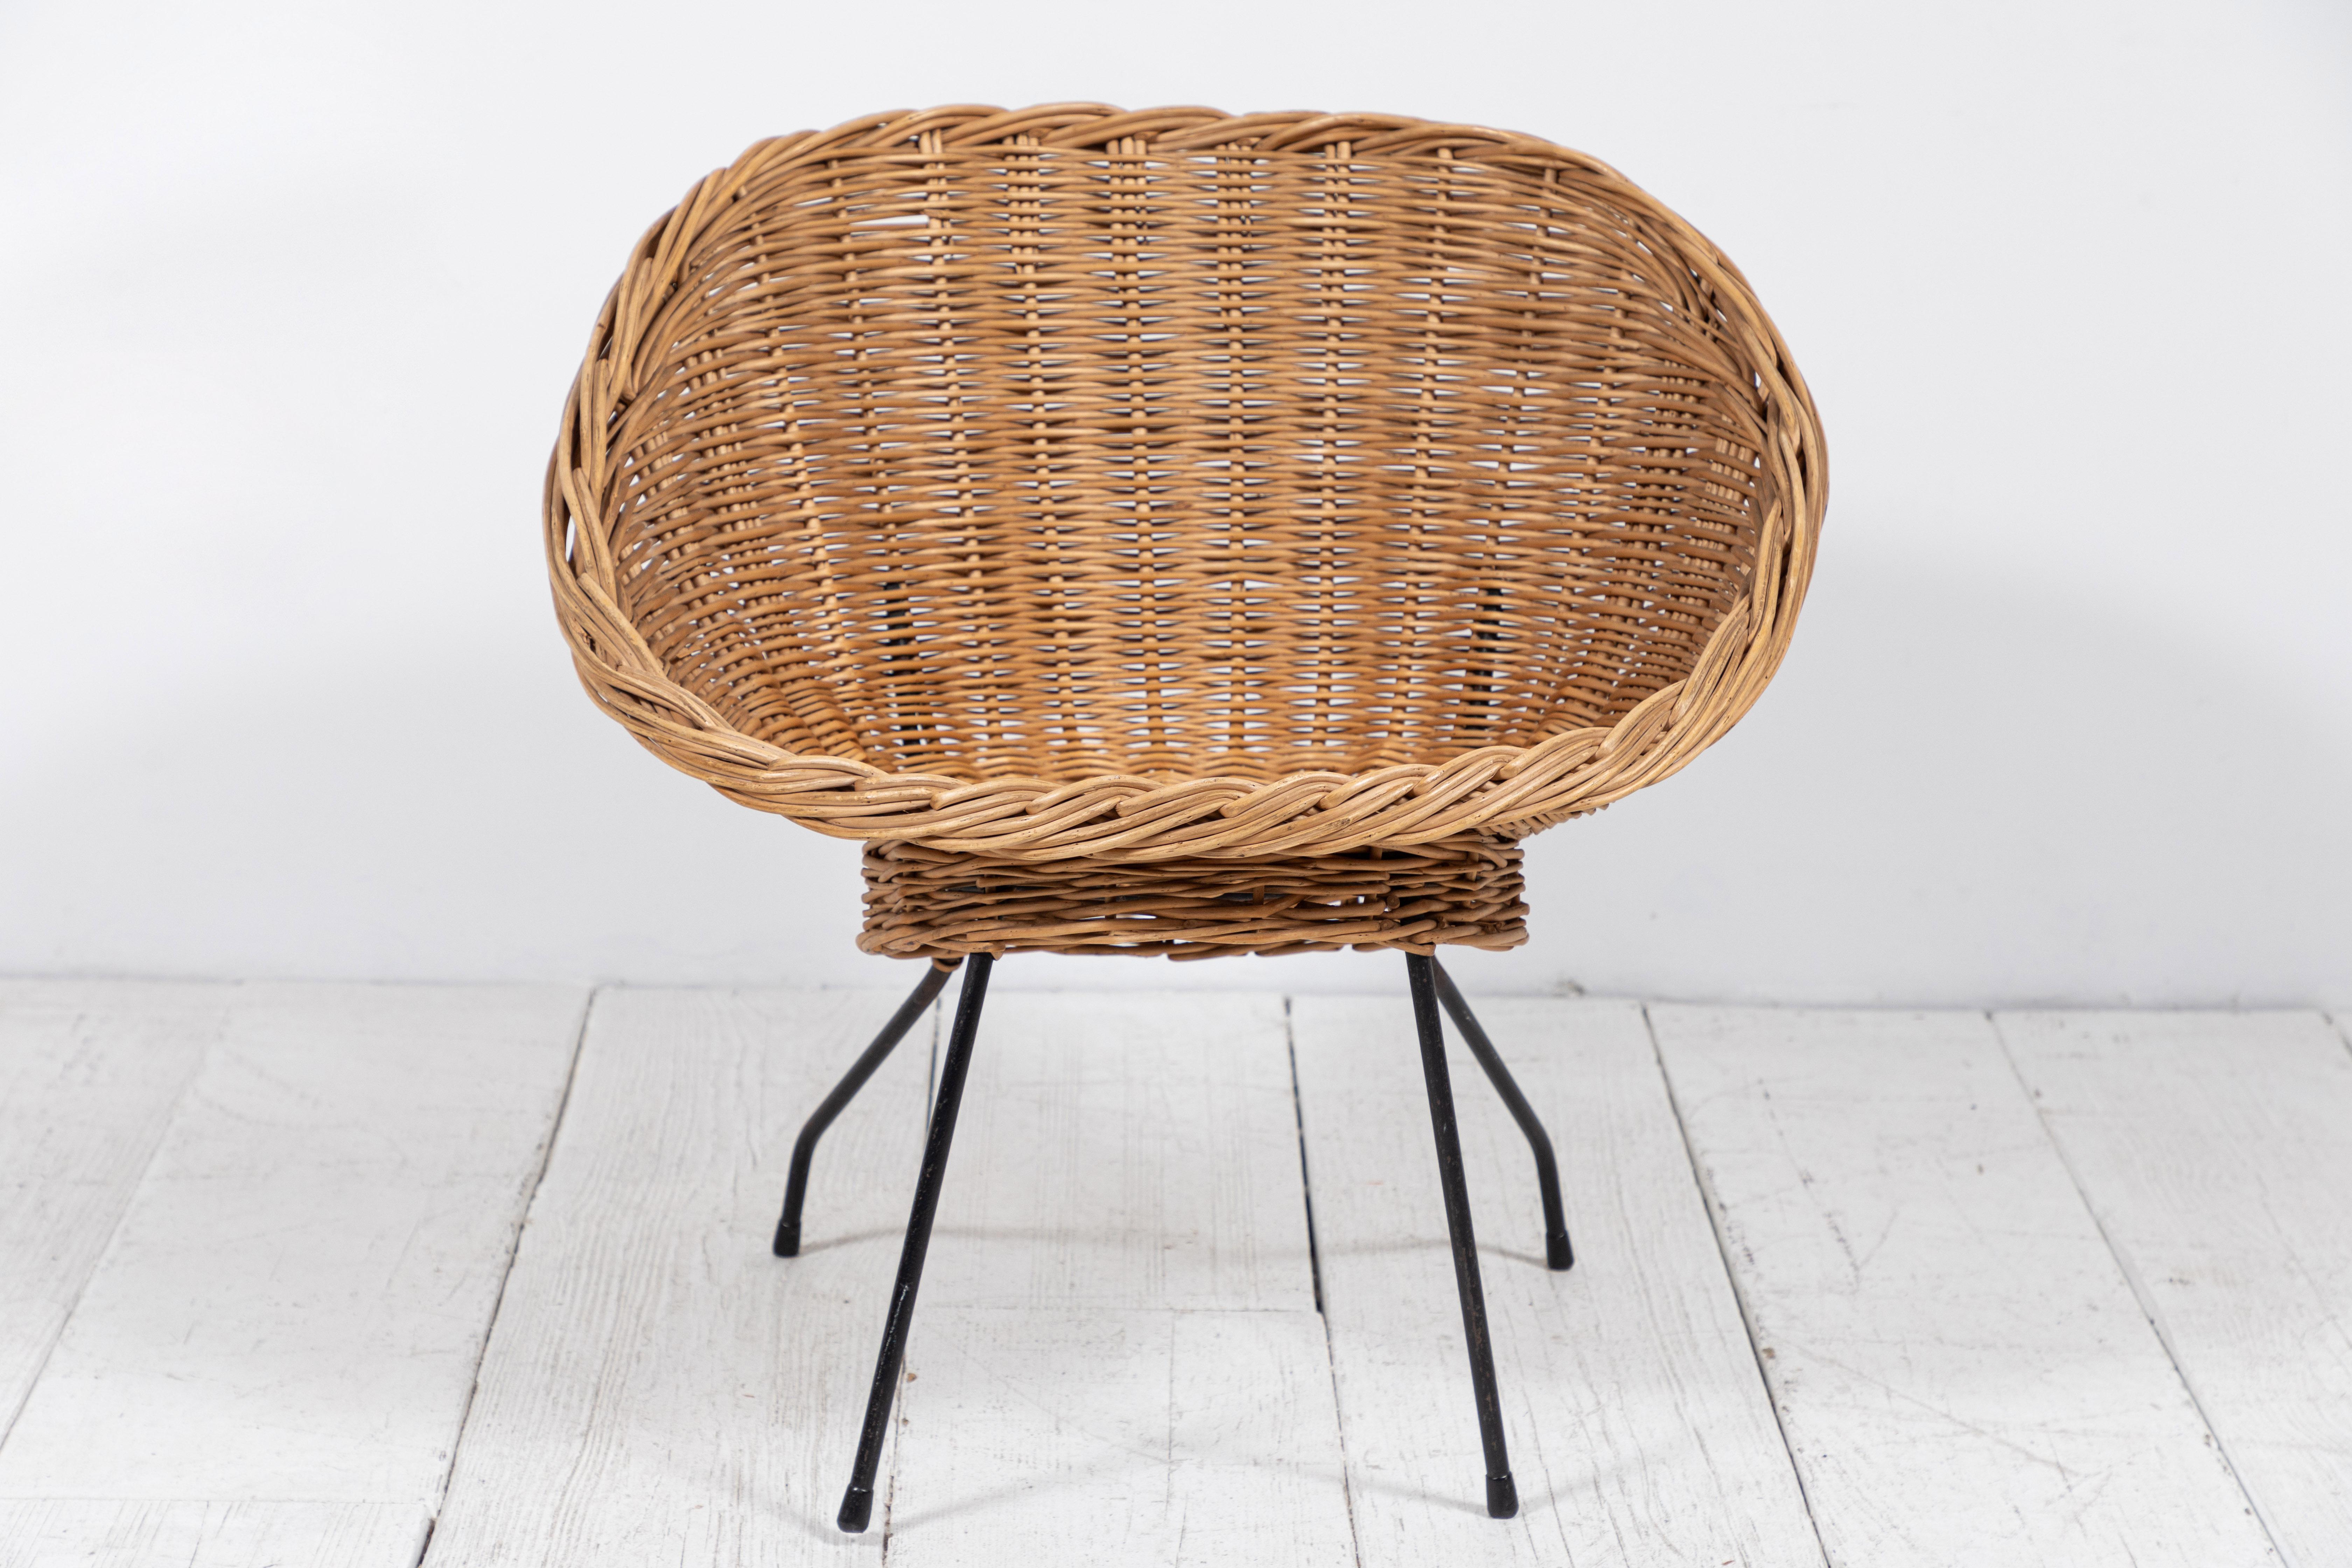 French woven basket weave chairs in the style of Jacques Adnet. Four chairs available.